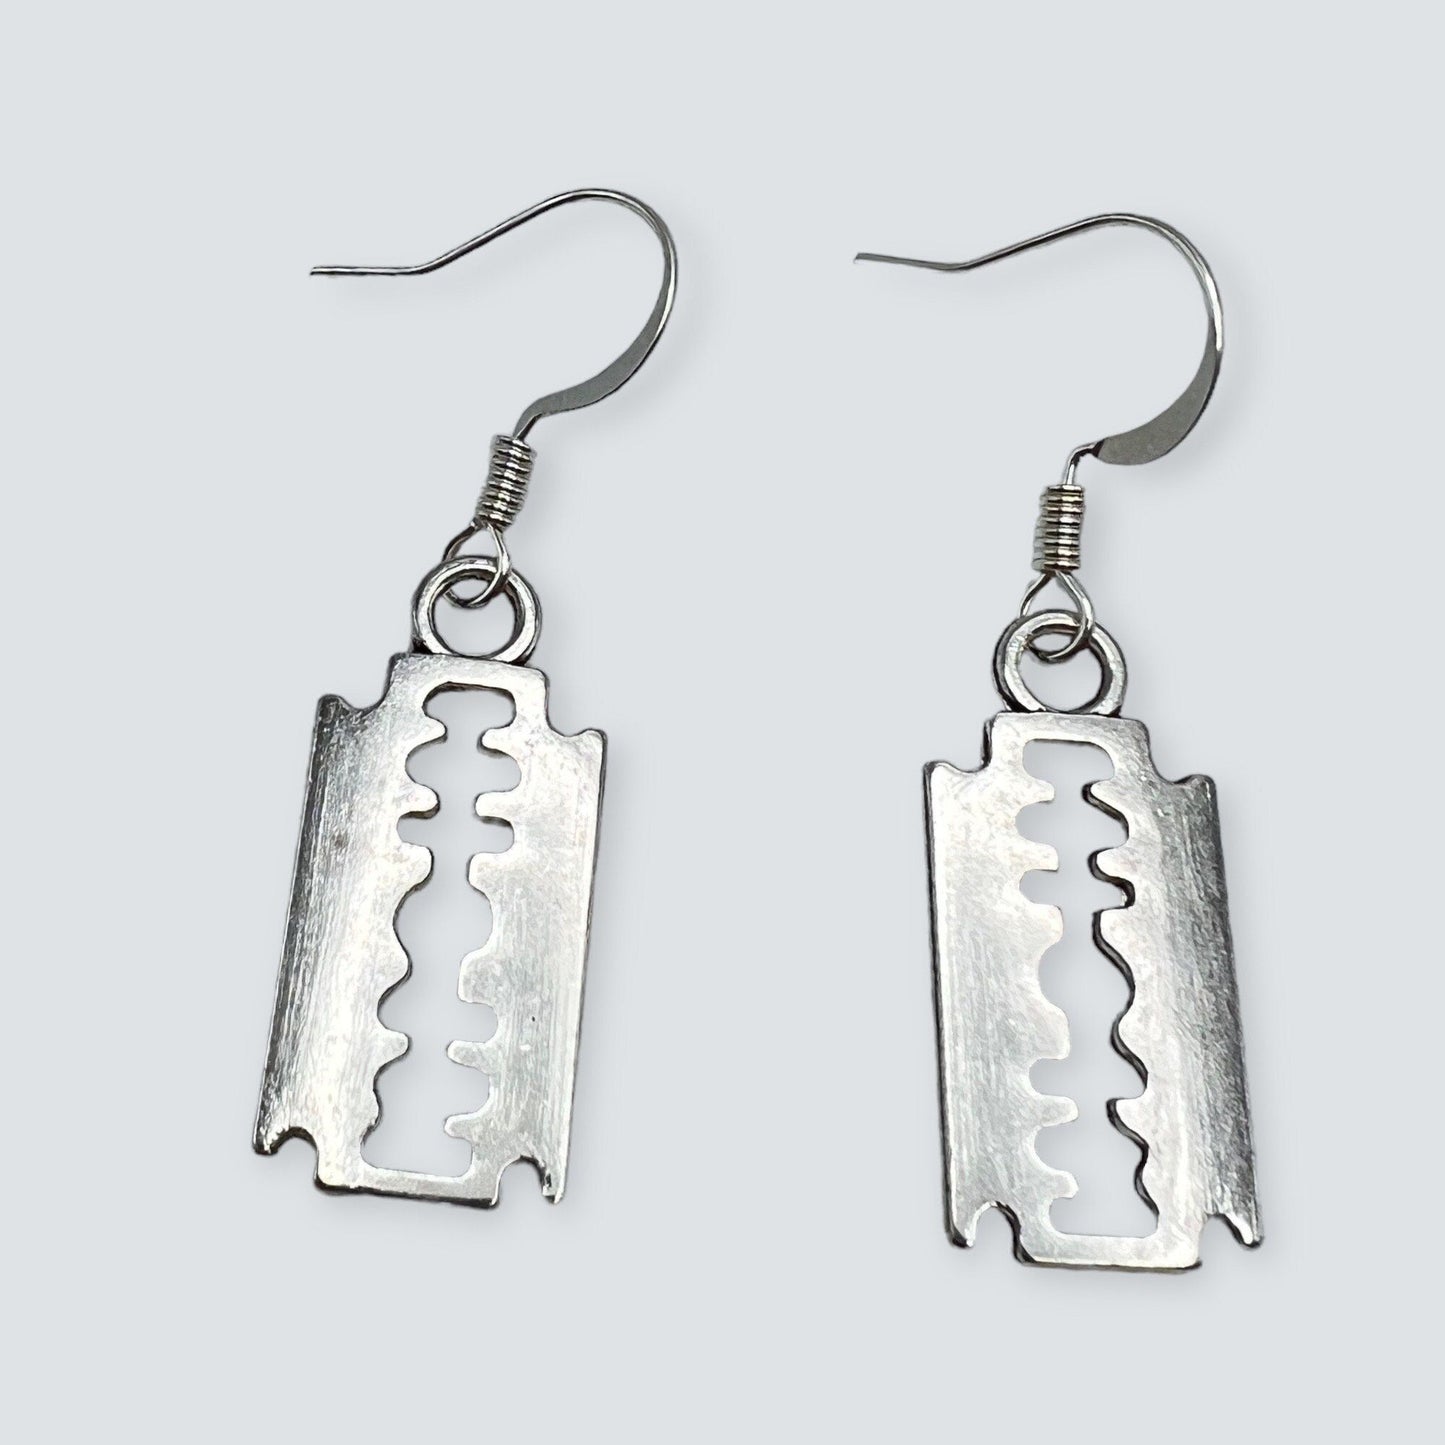 Silver tone razor blade charm earrings, inspired by punk and goth fashion. Displayed on a table.